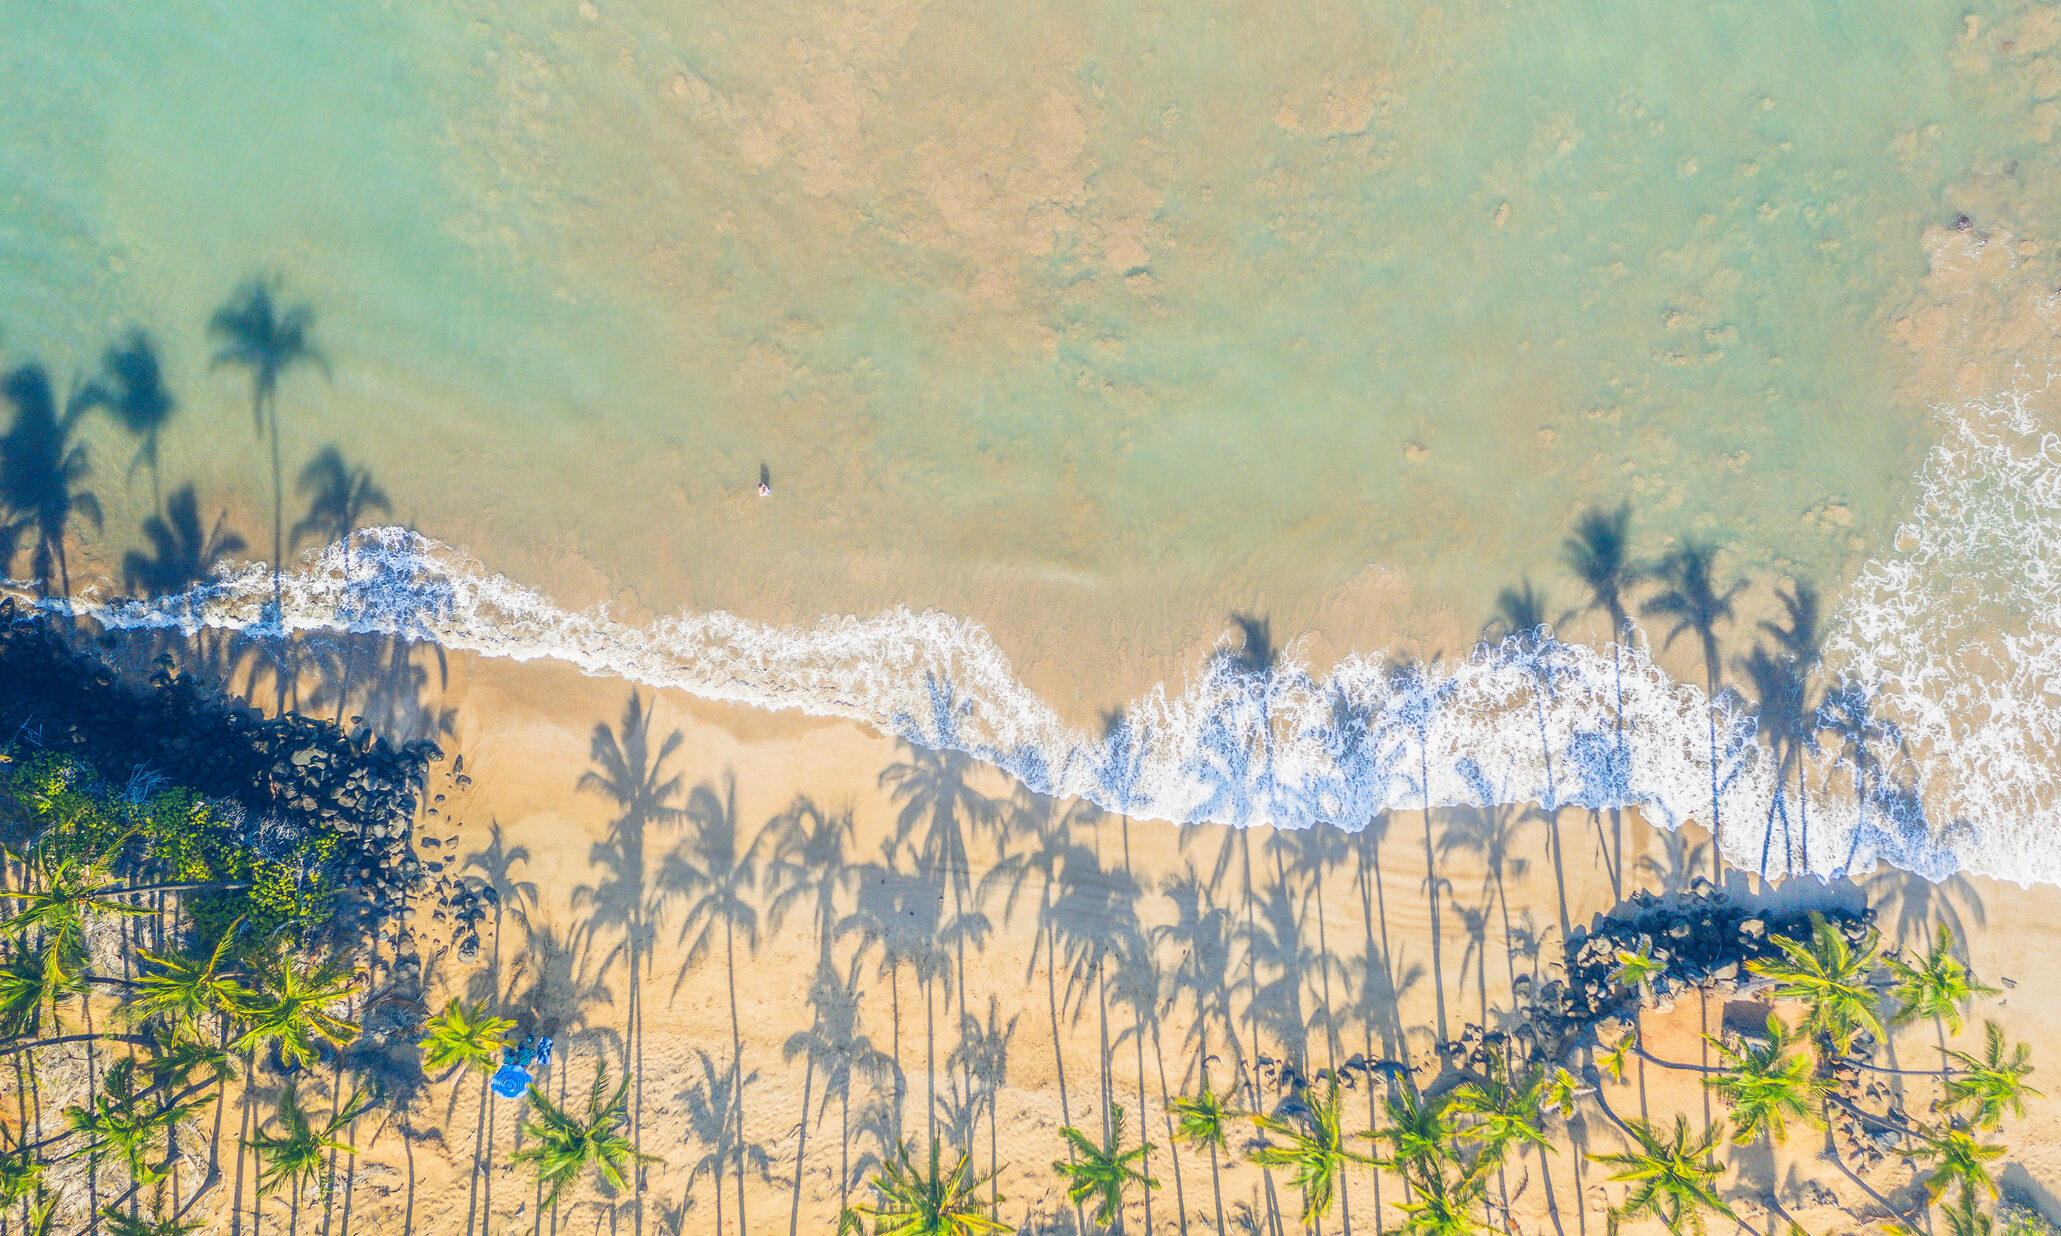 Aerial view of a Hawaiian beach with palm trees